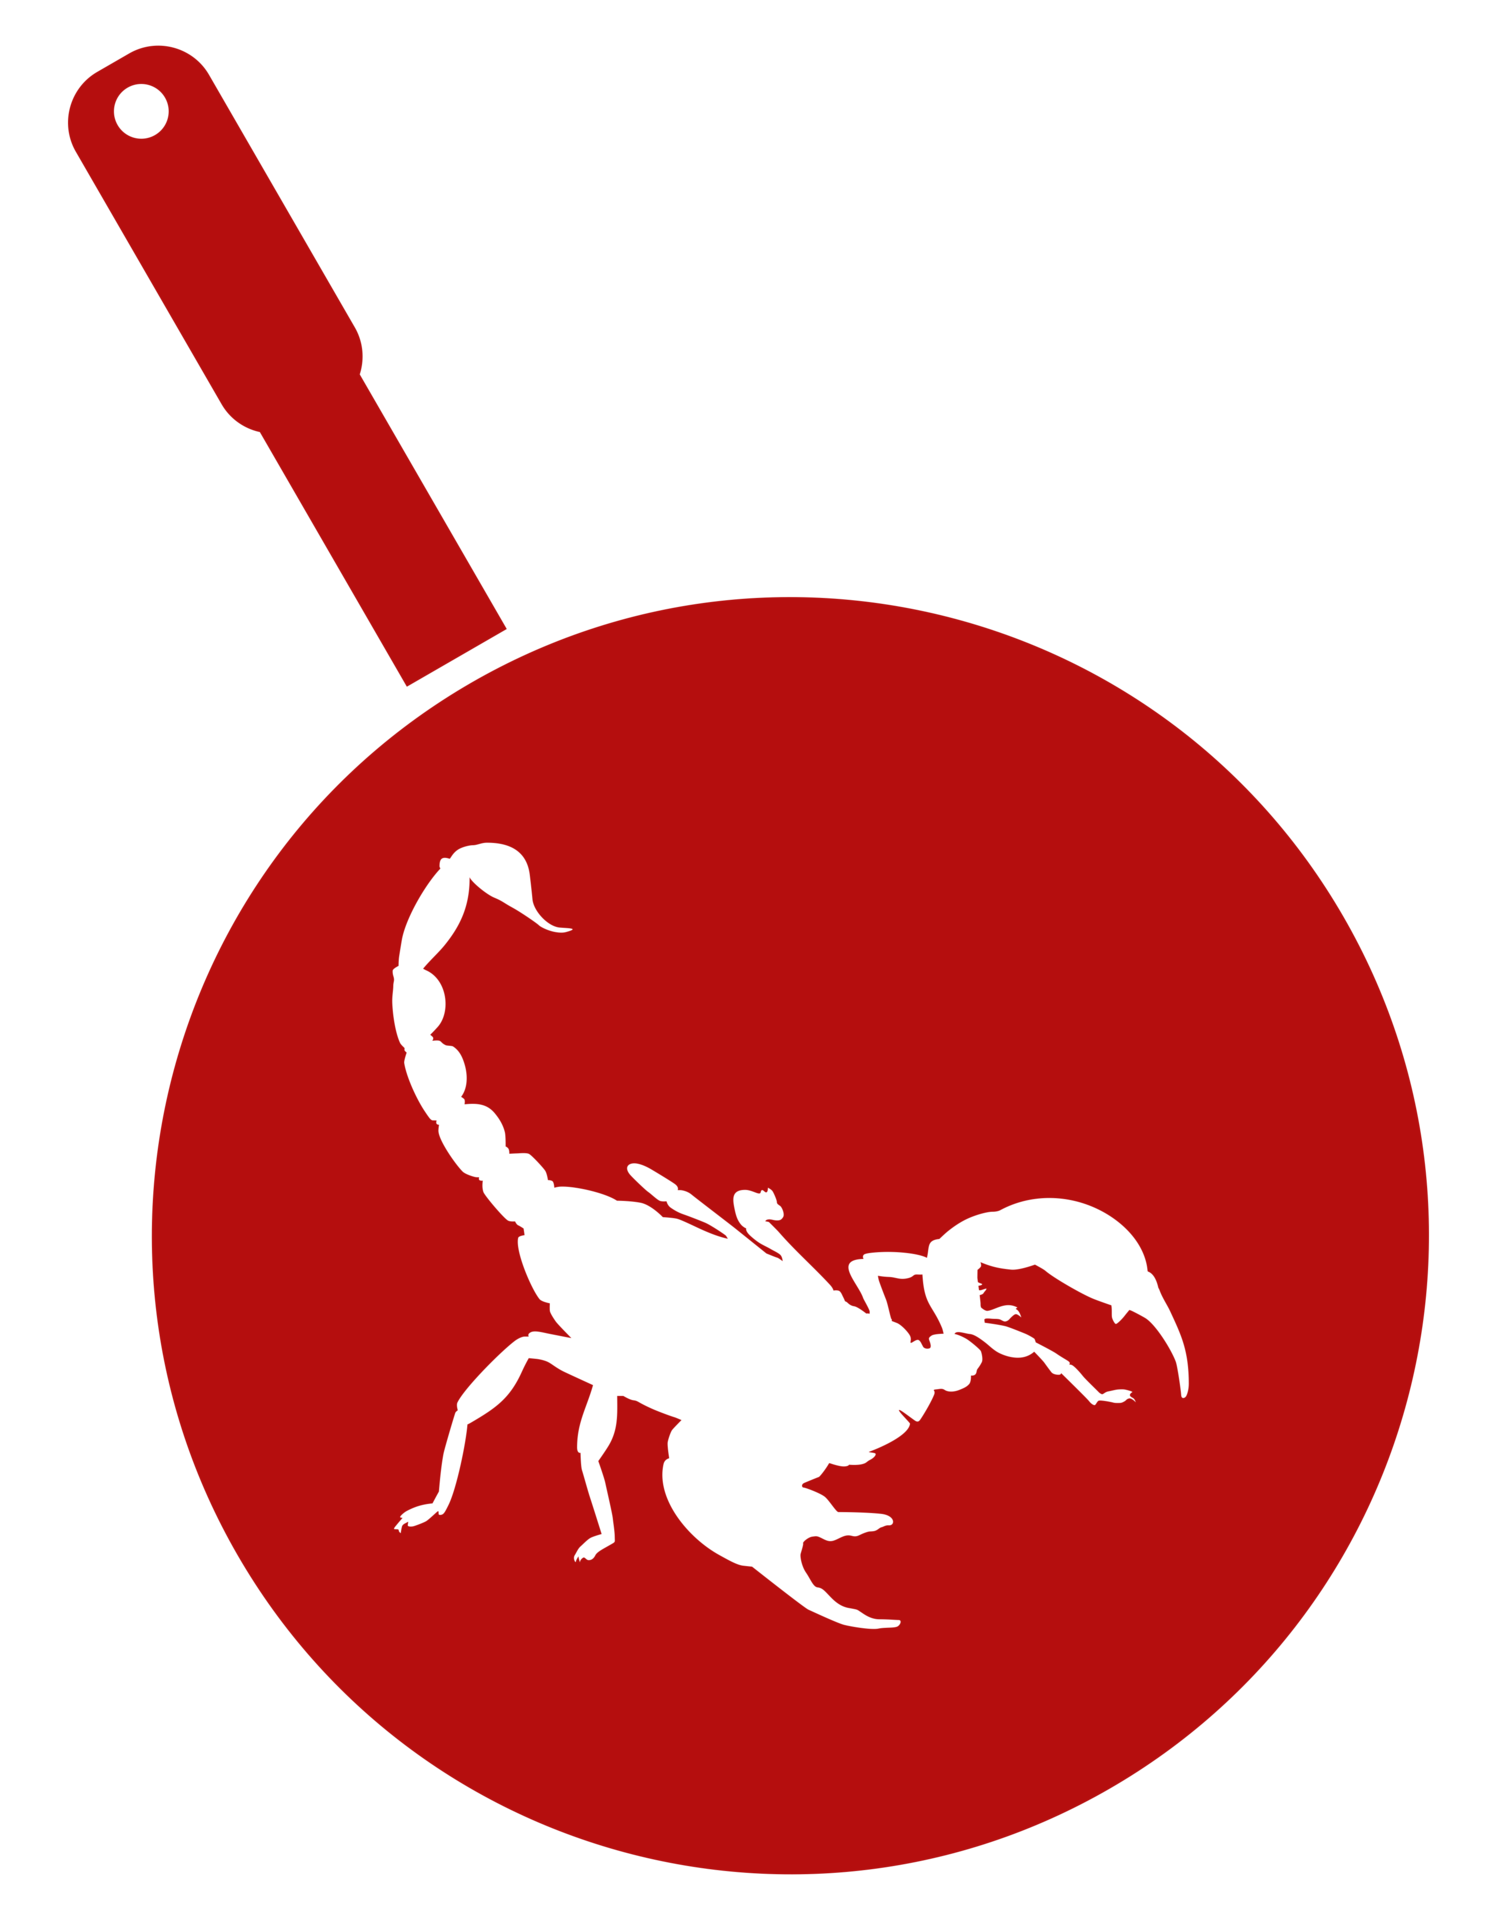 tildeling åndelig Modstander Scorpion on the Pan Silhouette for Bizarre or Extreme or Exotic Food,  Traditional Food in Asian Country, Culinary Sign for Icon Symbol, Apps,  Pictogram, Logo, Website, or Graphic Design Element. PNG 21967599